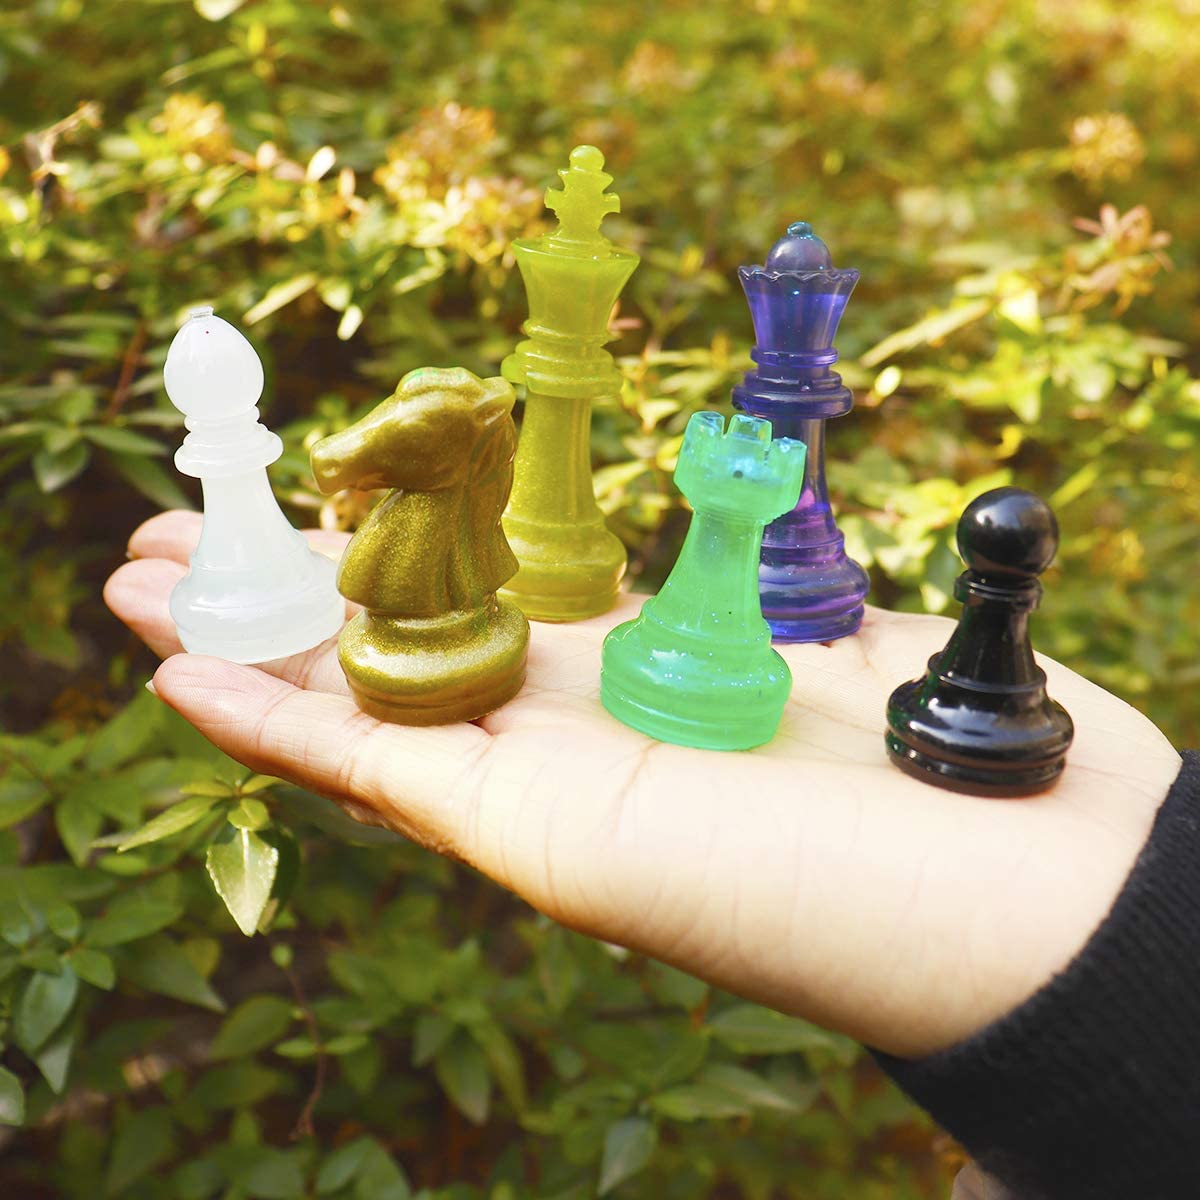 QUSENLON Chess Set with Checkers Board Silicone Resin Mold Full